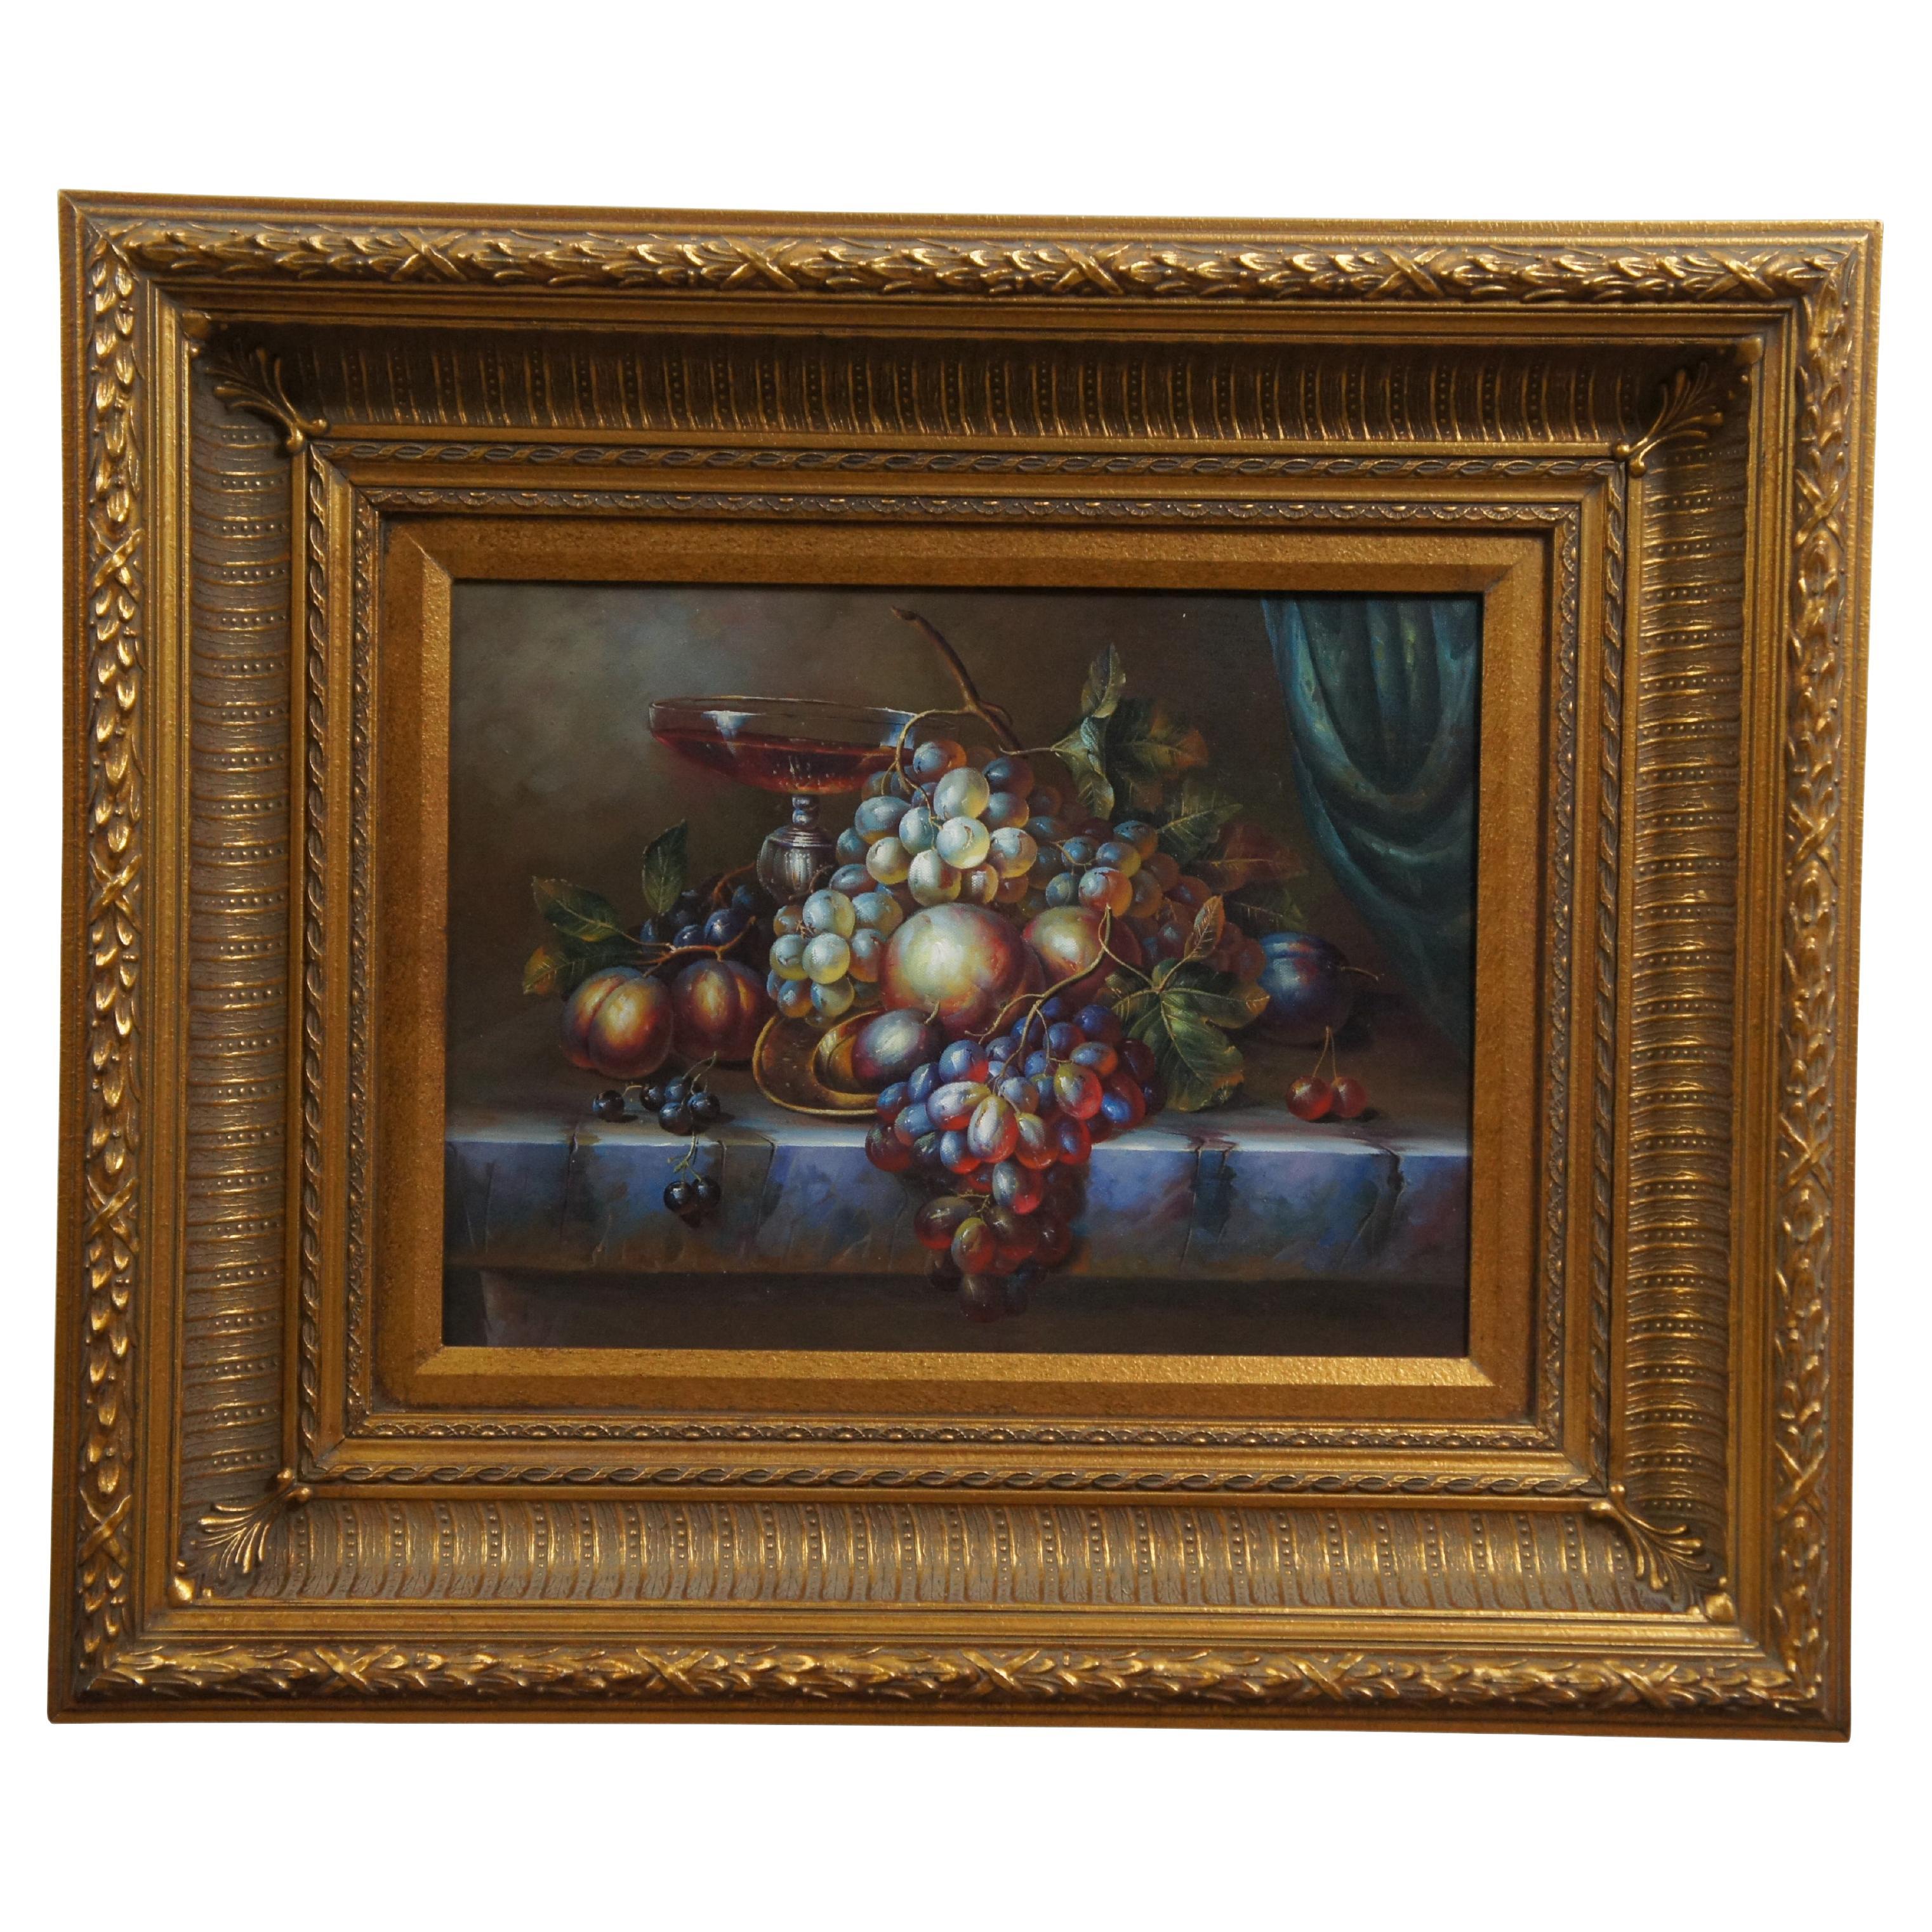 Vintage Still Life Fruit Grapes Wine Oil Painting on Canvas Gold Frame 27"